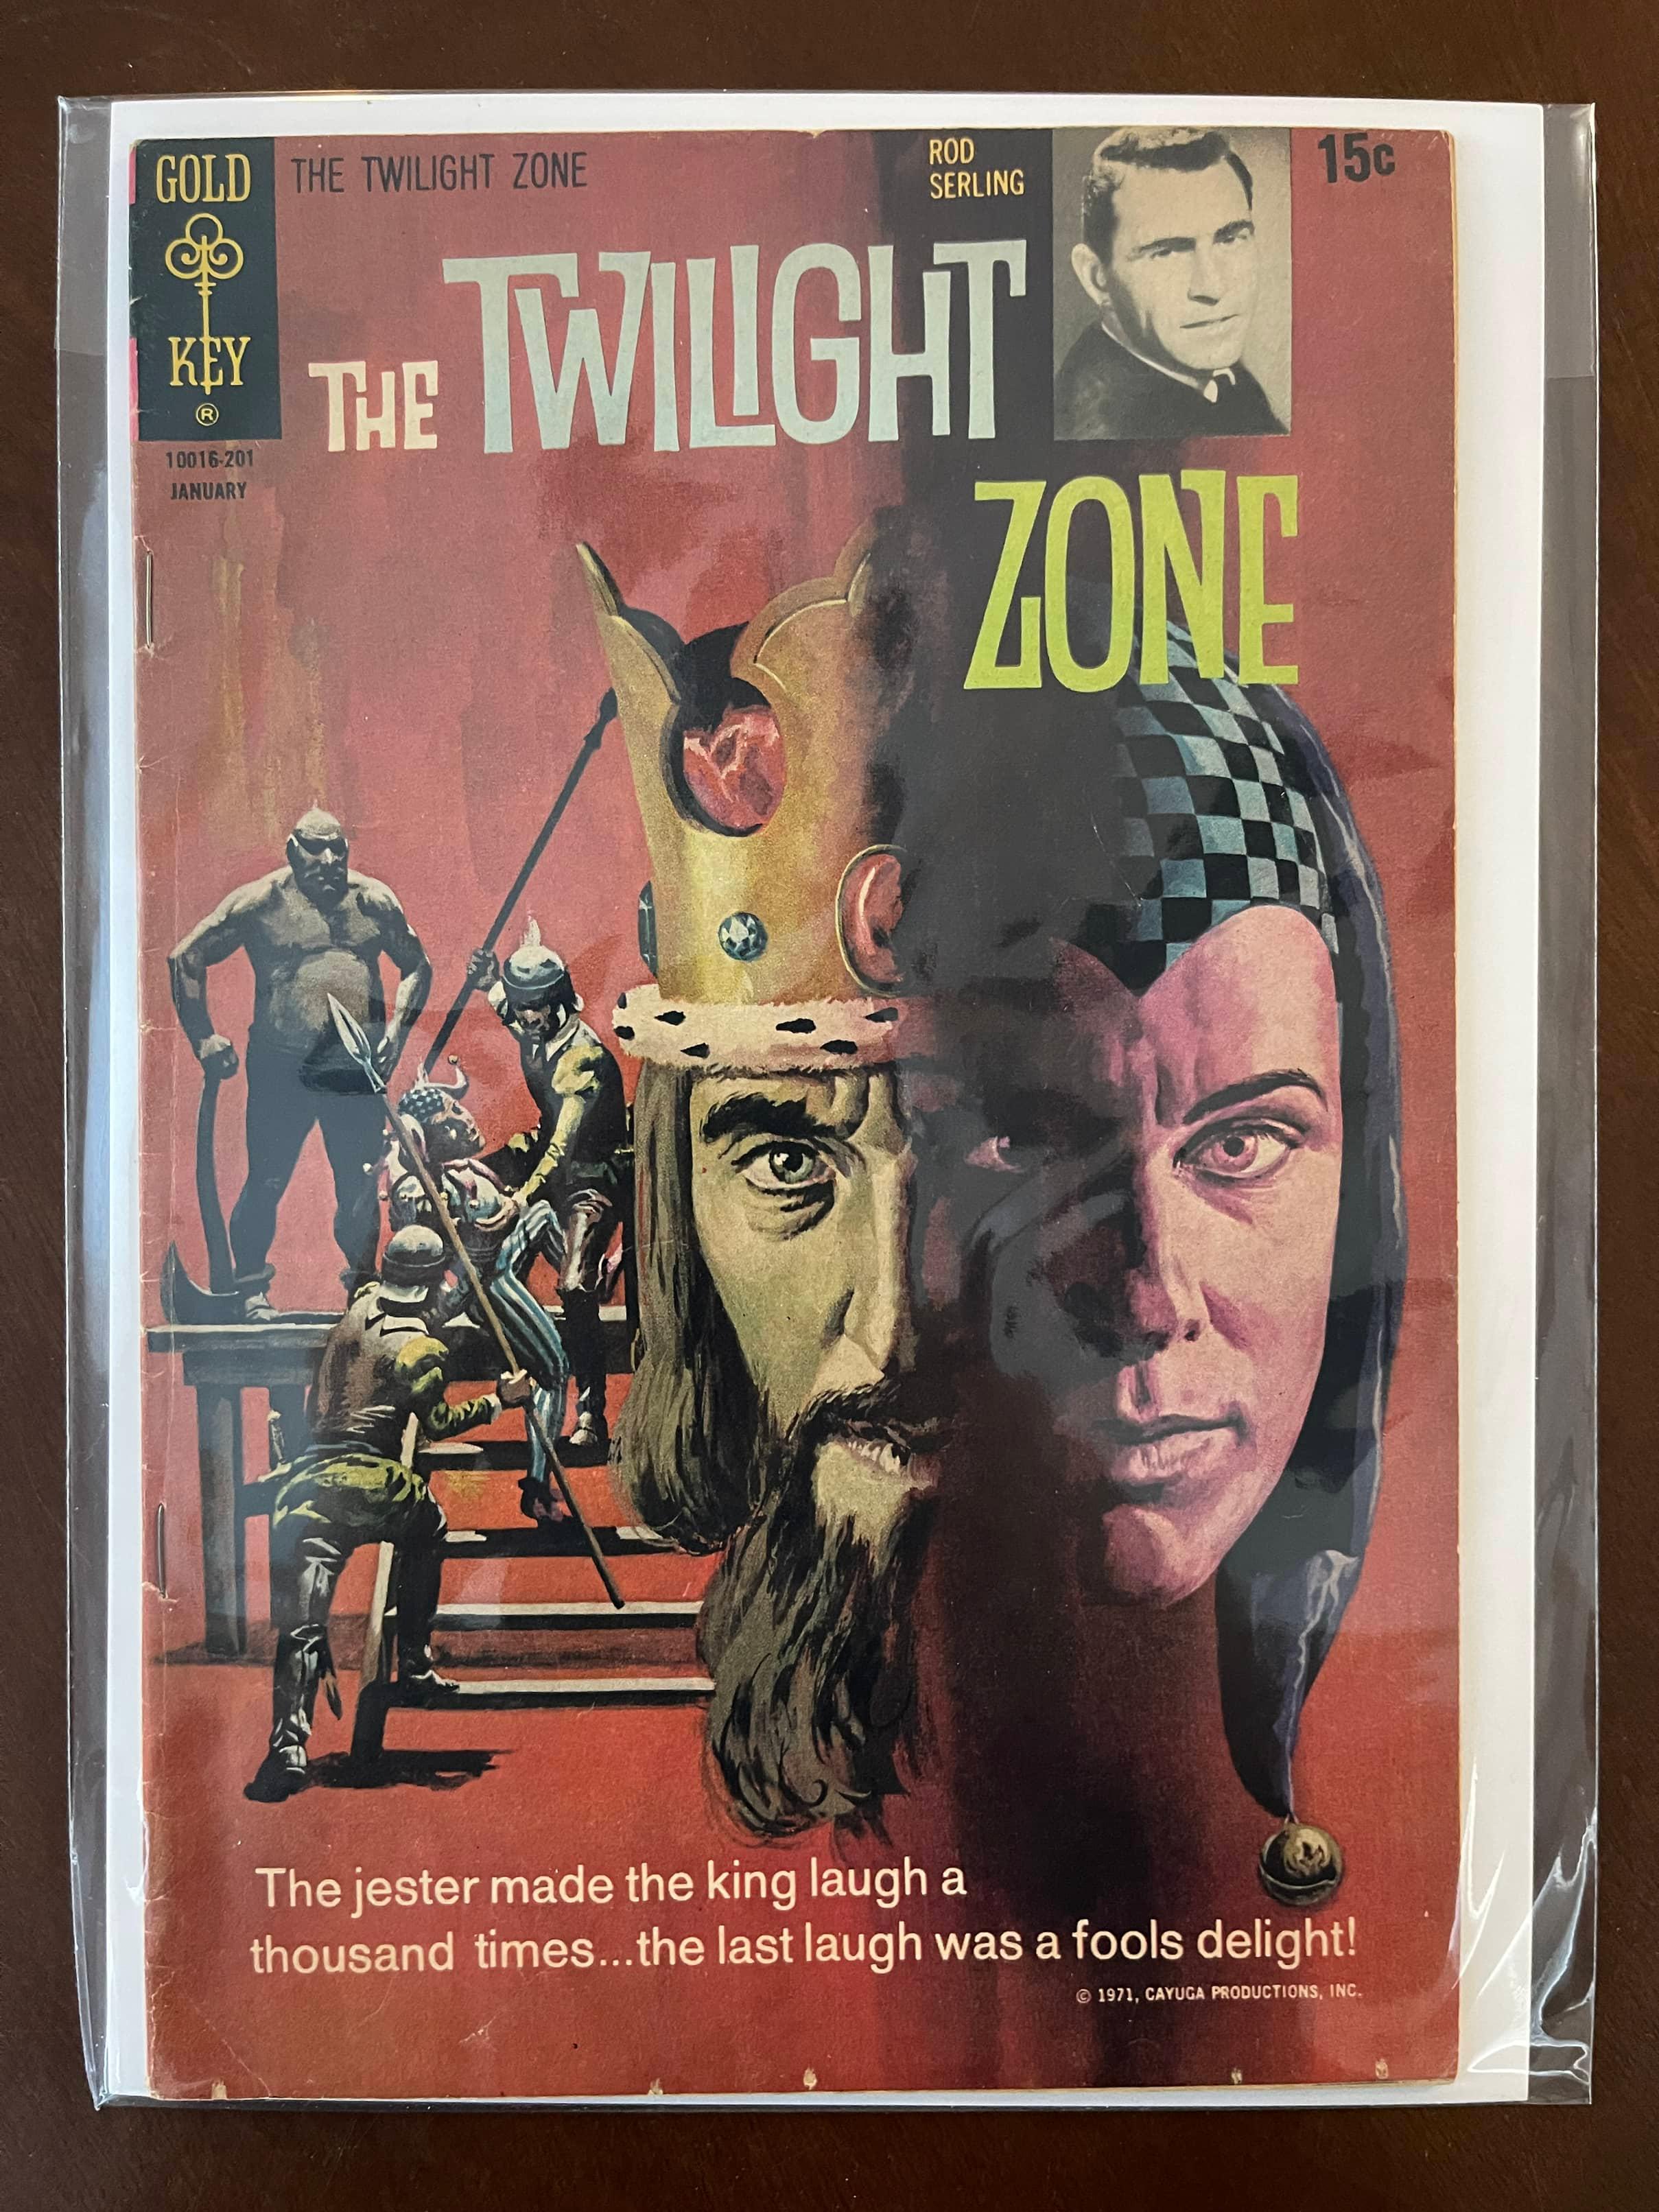 The Twilight Zone Comic #41 Gold Key 1972 Bronze Age TV Show Comic Rod Serling 15 Cents